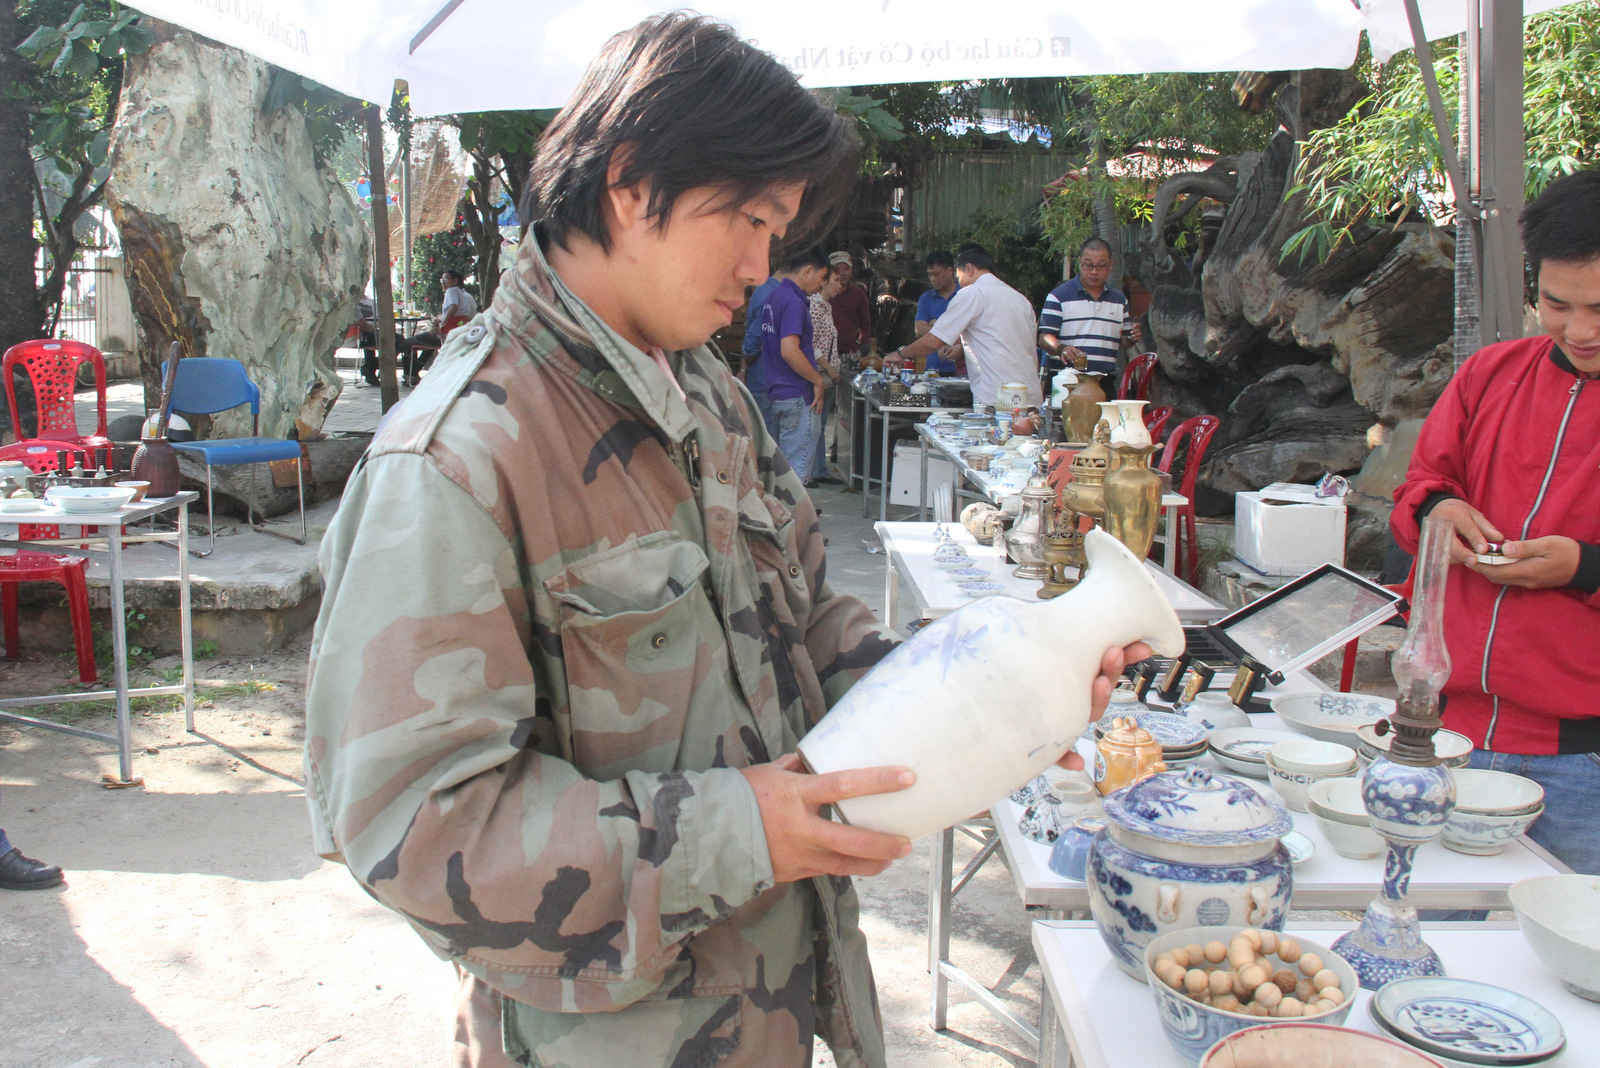 Collector from Dong Nai Province joins Khanh Hoa’s antique fair.